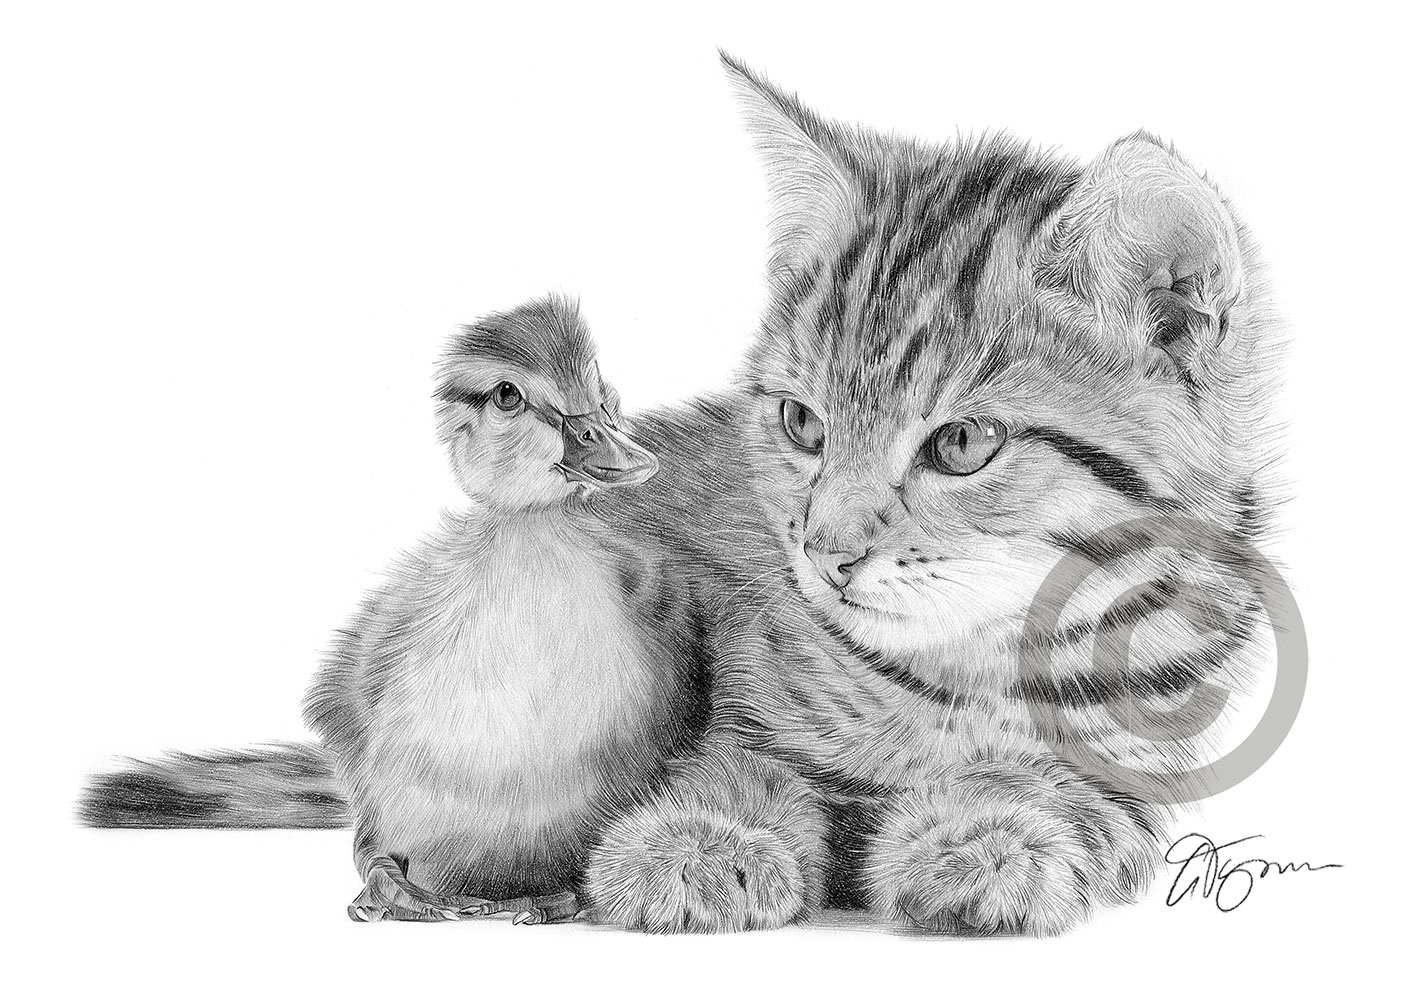 Pencil drawing of a cat and duckling by artist Gary Tymon